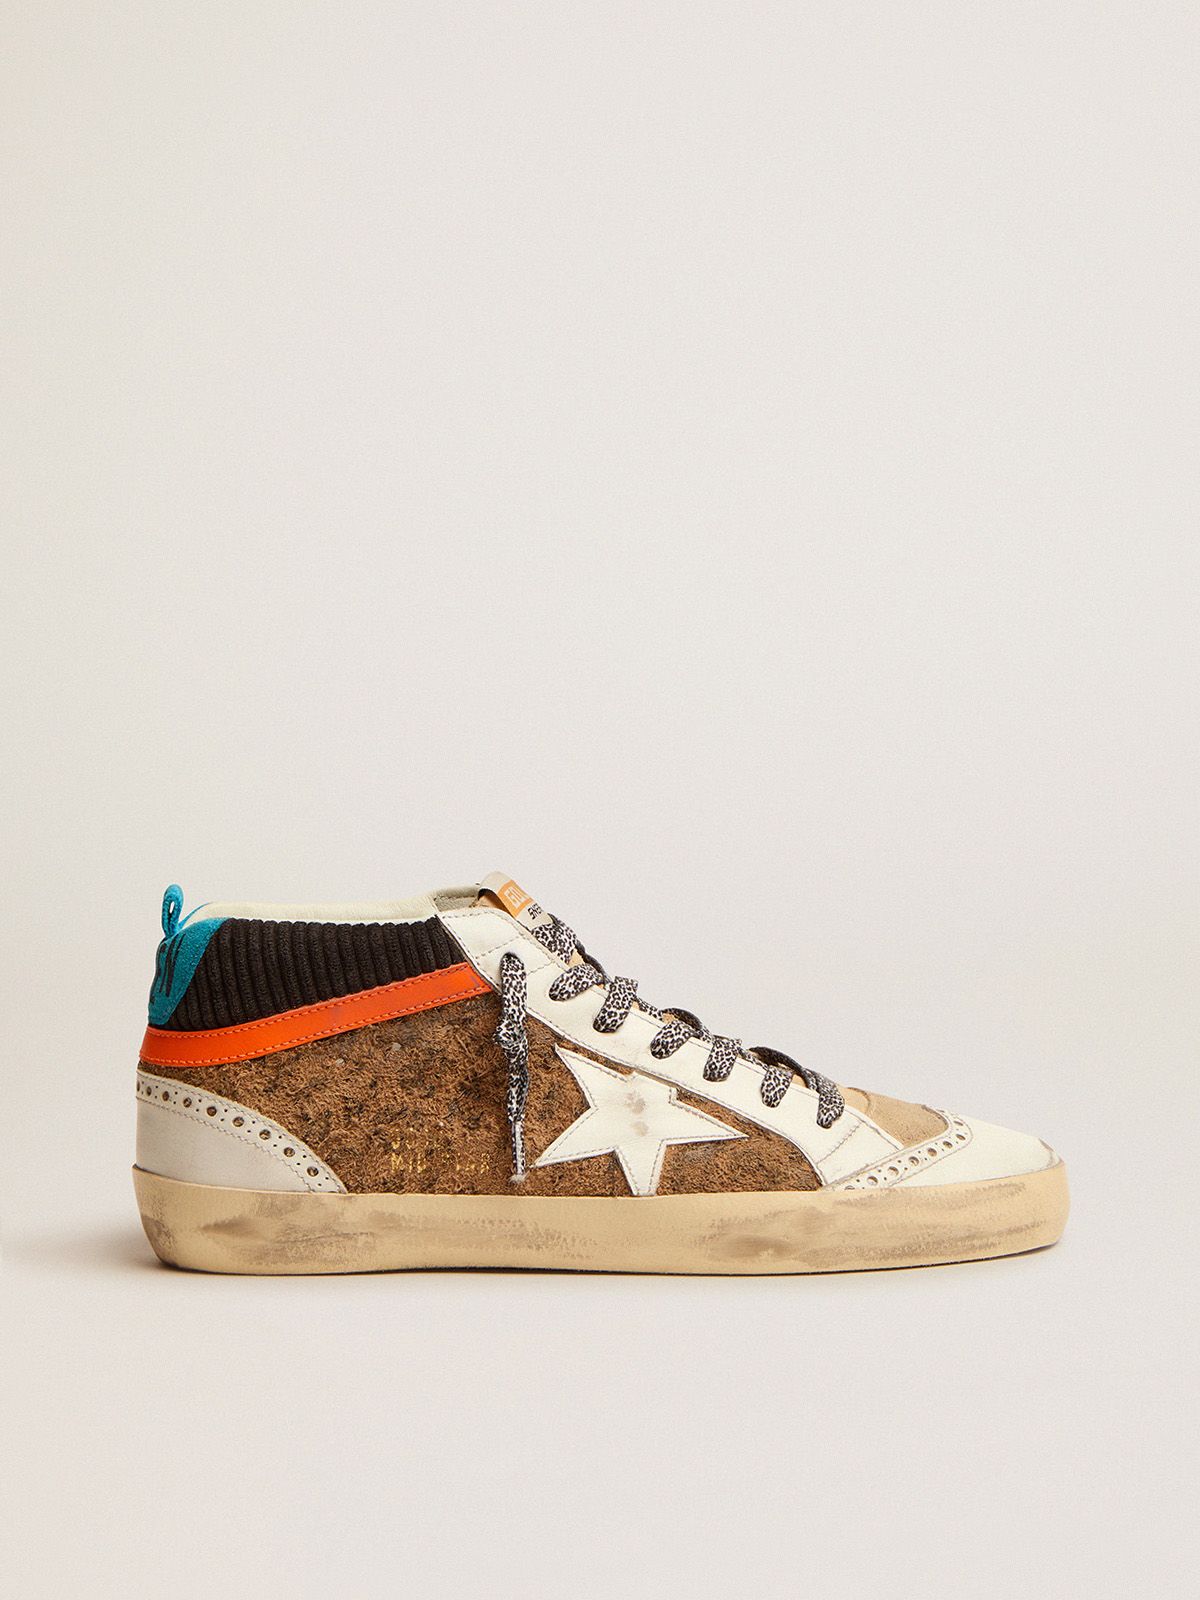 golden goose corduroy-print upper and LTD sneakers Mid suede Star with leopard-print